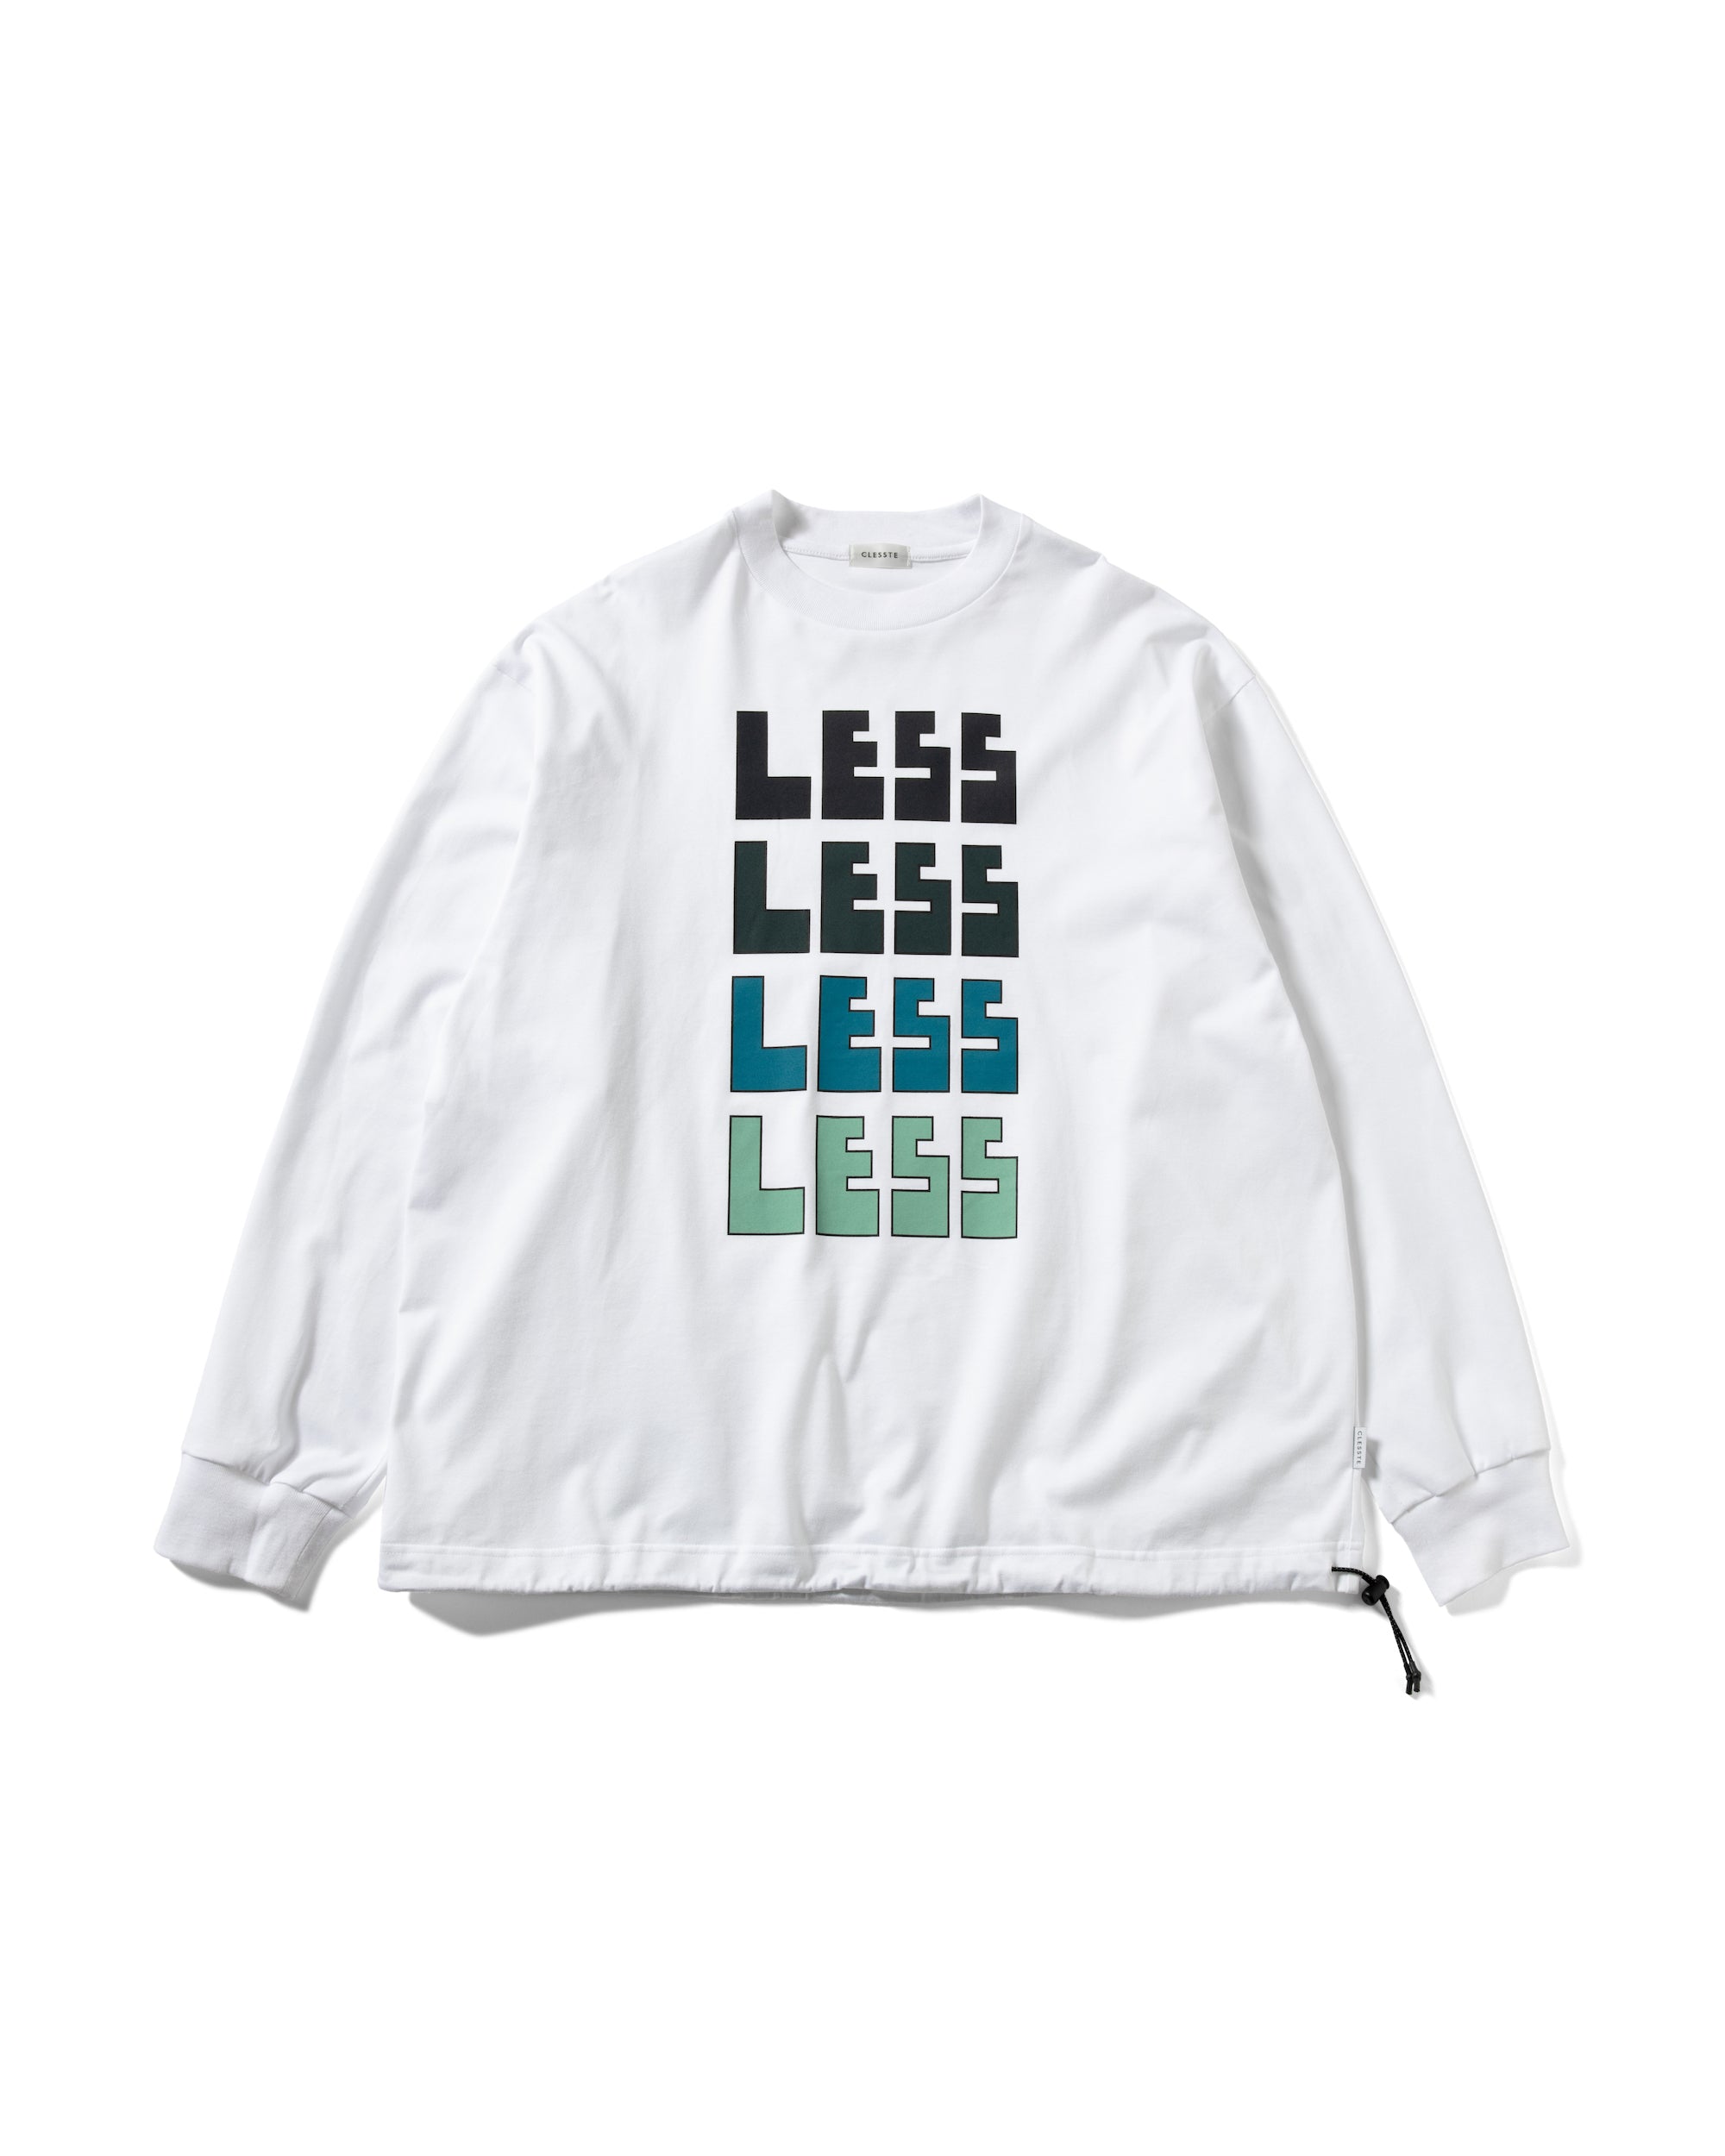 【4.17WED 20:00- IN STOCK】"LESS" MASSIVE L/S T-SHIRT WITH DRAWSTRINGS